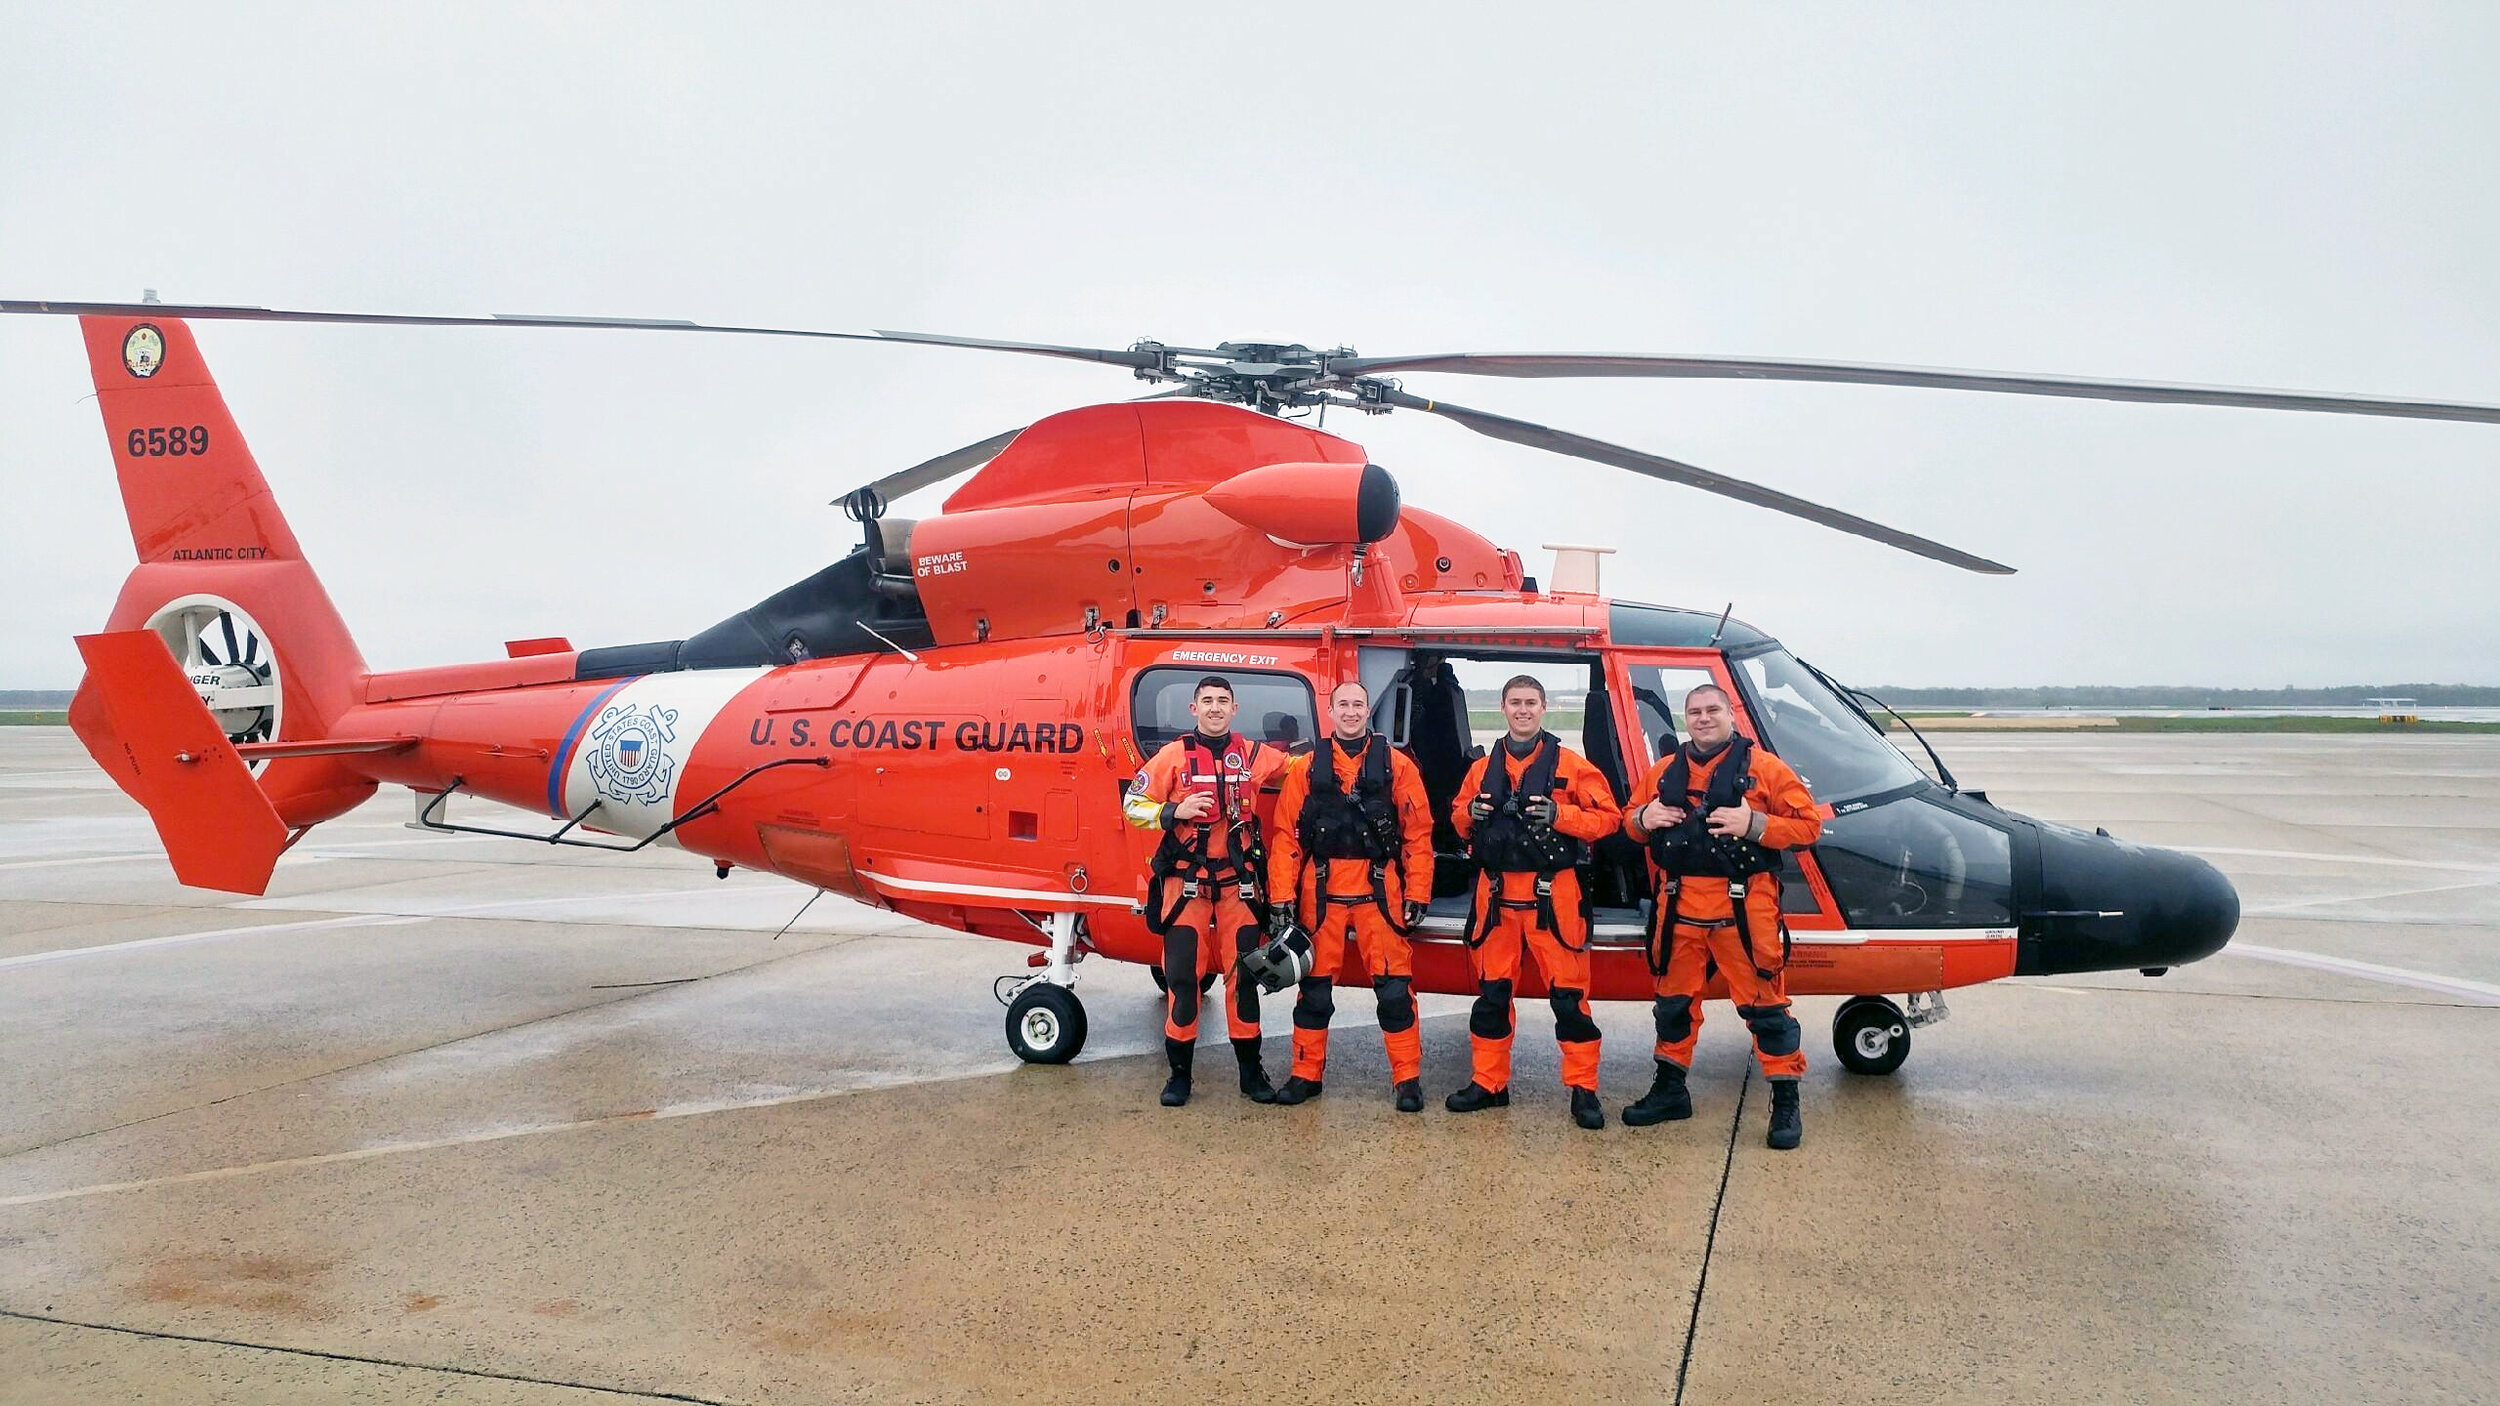  A Coast Guard helicopter crew poses for a group photo after a medevac mission in May 2016, when a 63-year-old fisherman fell ill aboard a 90-foot fishing vessel 60 miles southeast of Atlantic City. (U.S. Coast Guard photo) 